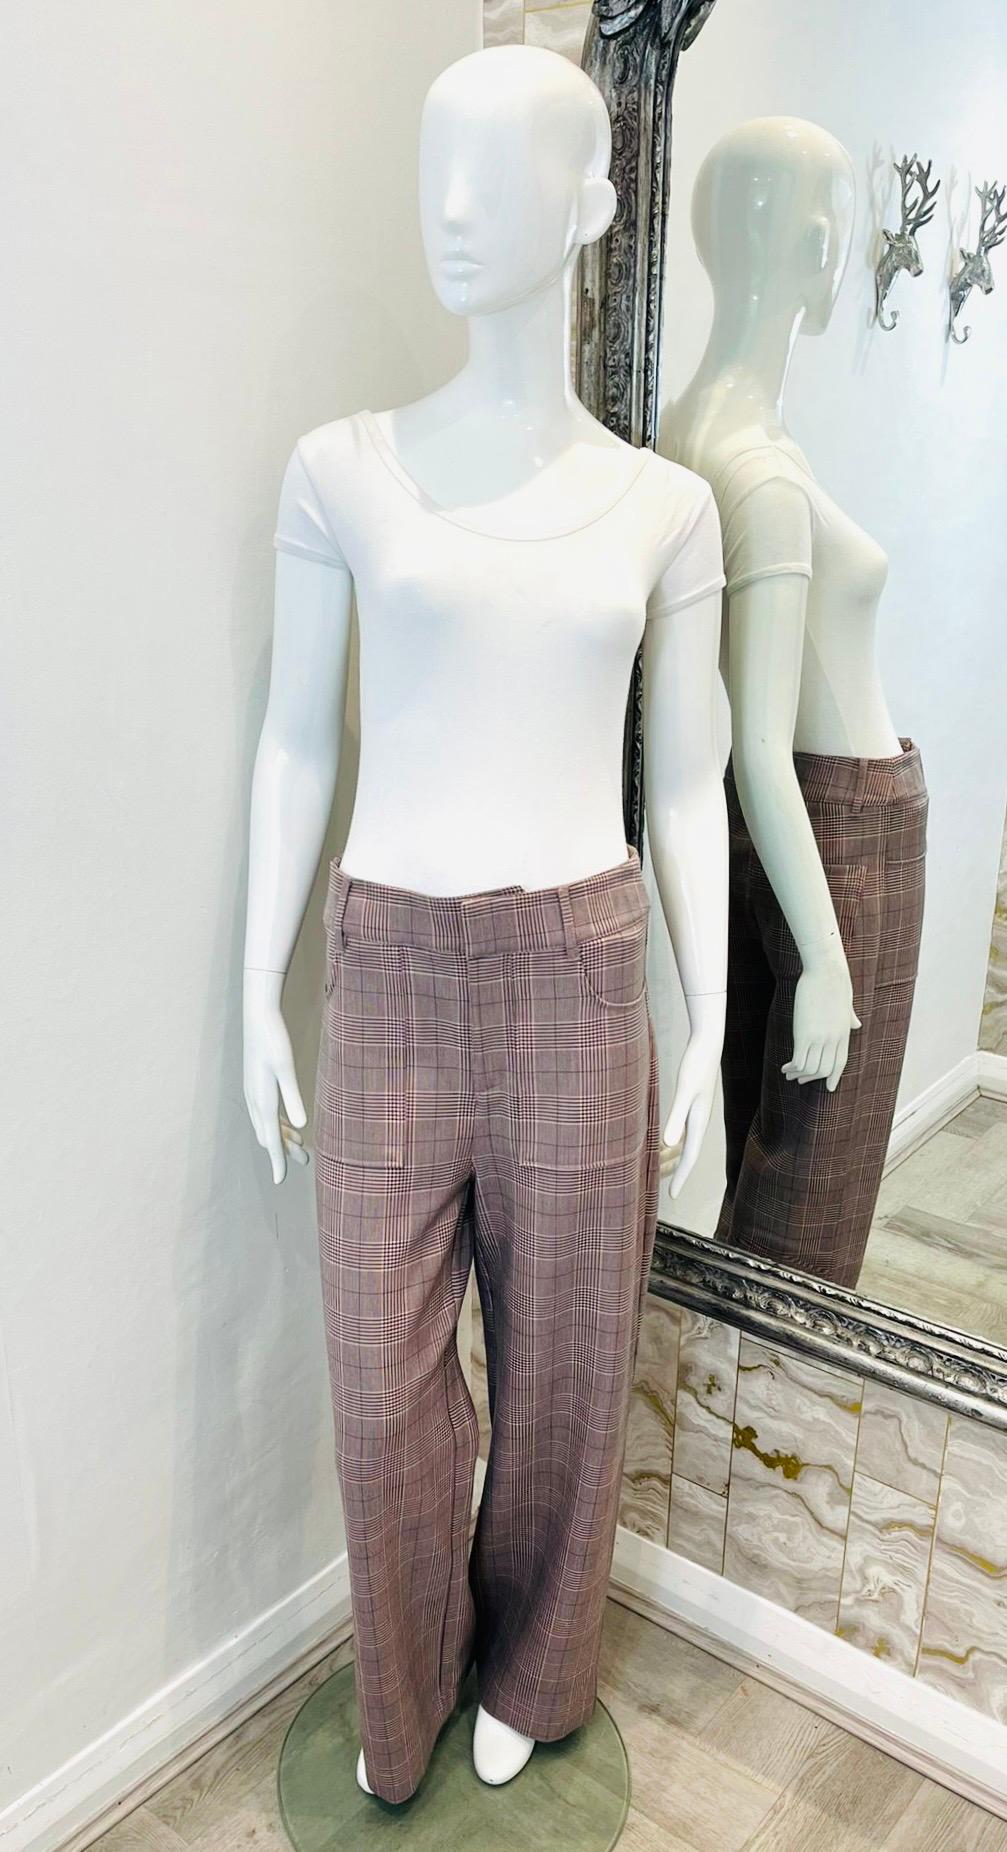 Ganni Checked Cady Trousers

Dusty pink trousers designed with check pattern and loose, straight-leg silhouette.

Detailed with oversized front pockets, belt loops and hooks and zip closure. Rrp £200

Size – 36FR

Condition – Very Good

Composition